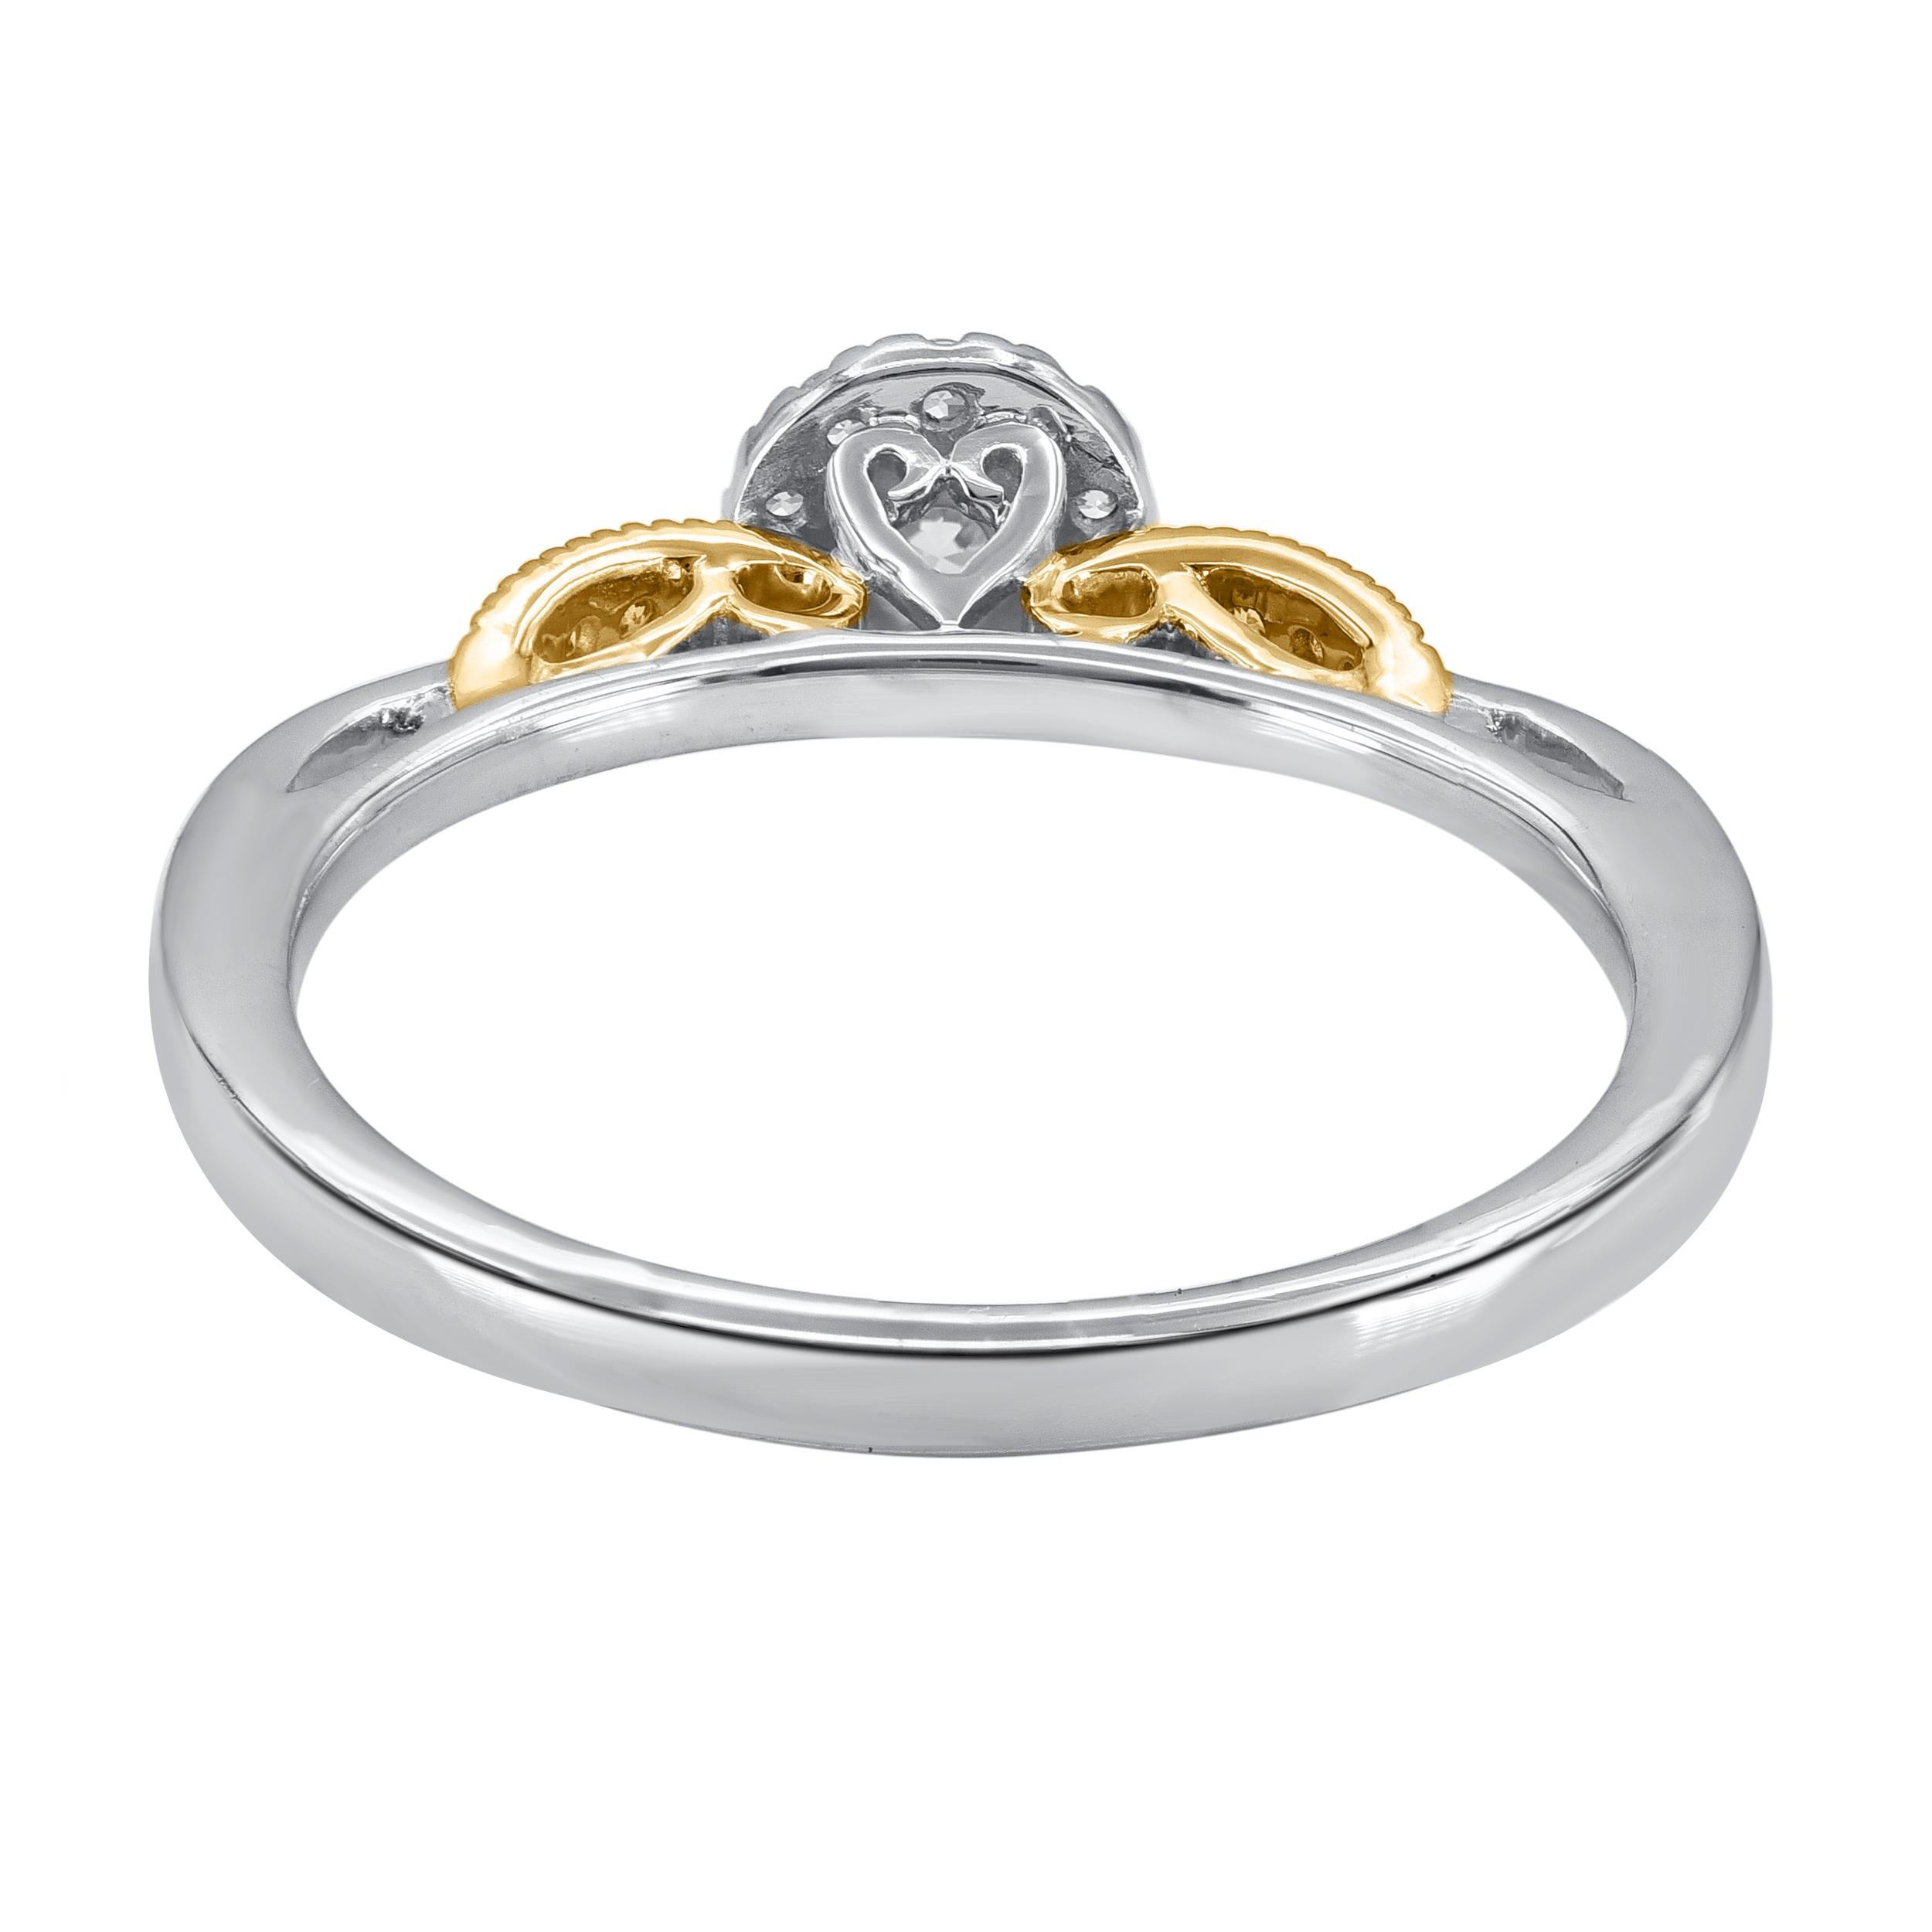 Contemporary TJD 0.23 Carat Round Diamond 14 Karat Two Tone Gold Bridal Engagement Ring For Sale